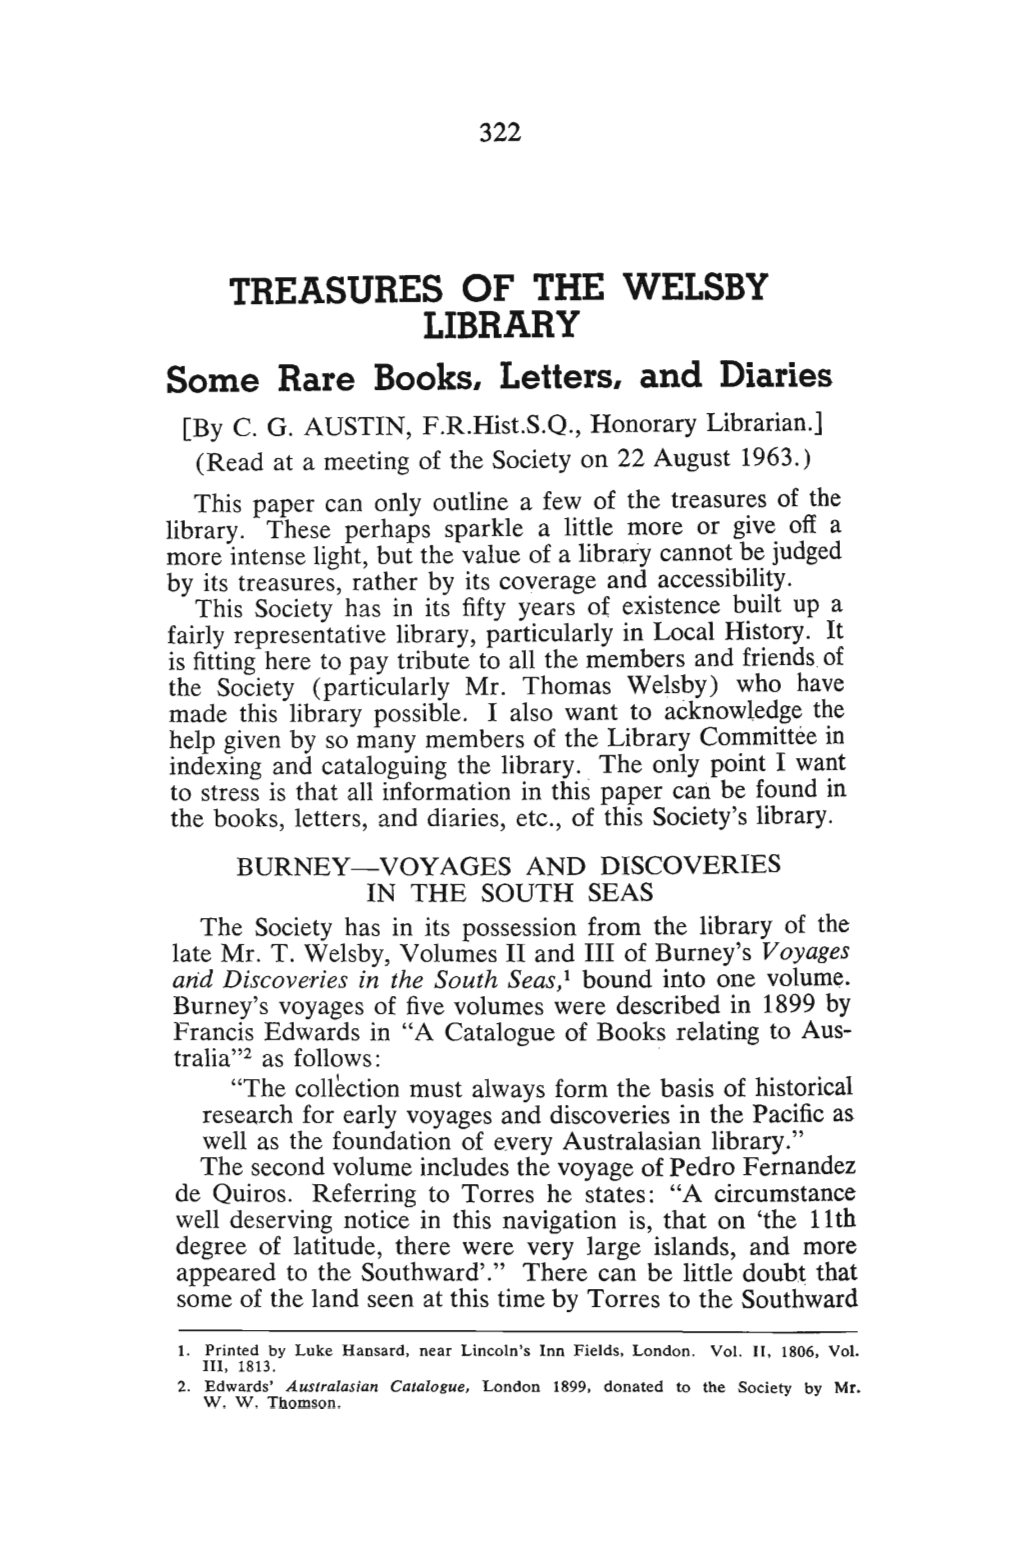 TREASURES of the WELSBY LIBRARY Some Rare Books, Letters, and Diaries [By C